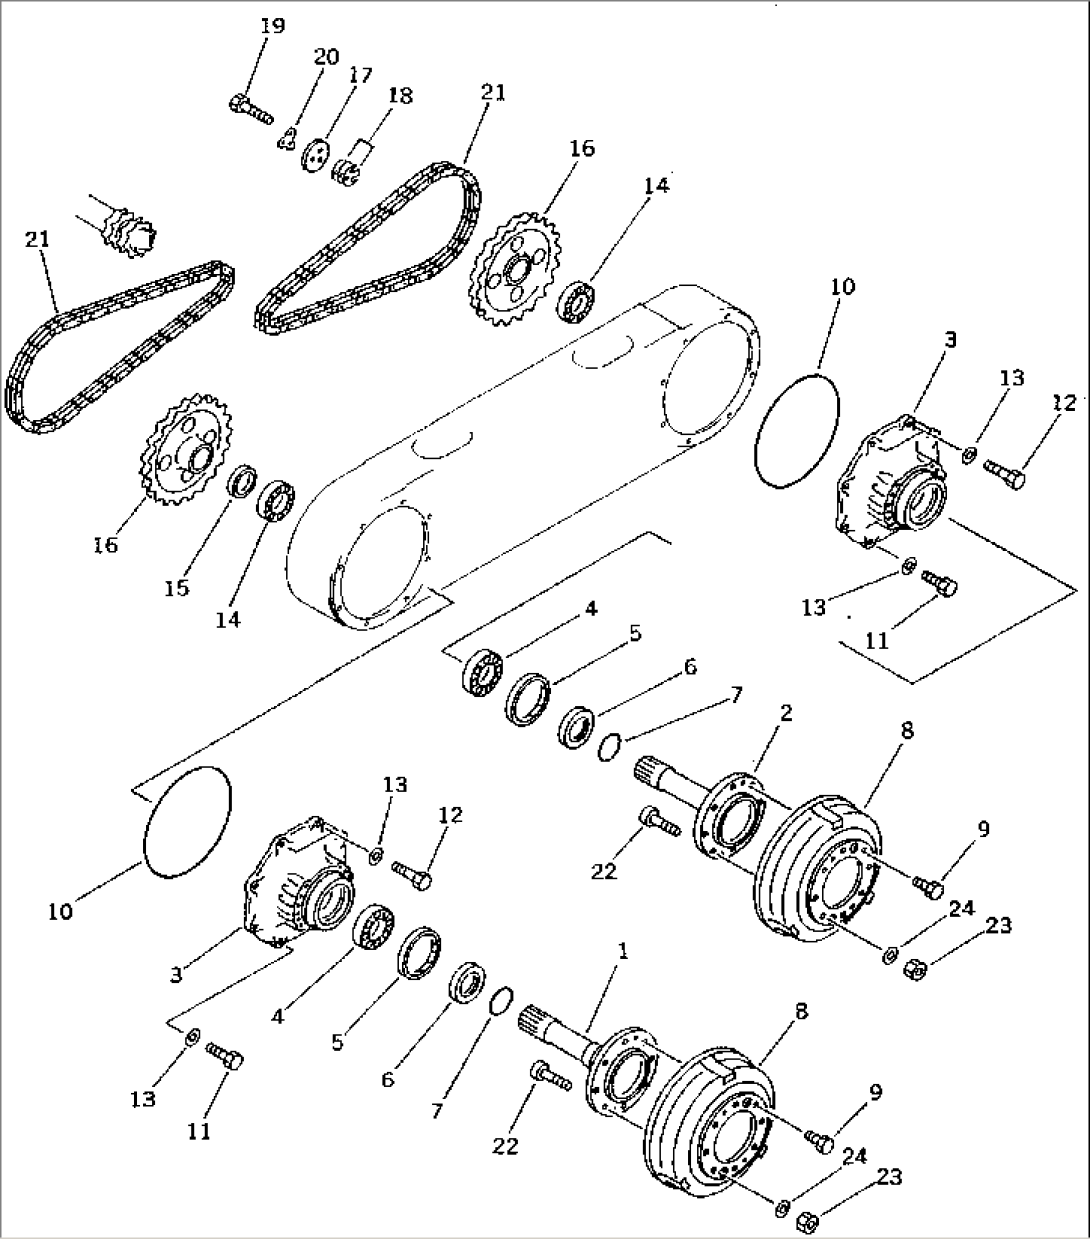 TANDEM DRIVE GEAR AND CHAIN(#1001-1414)